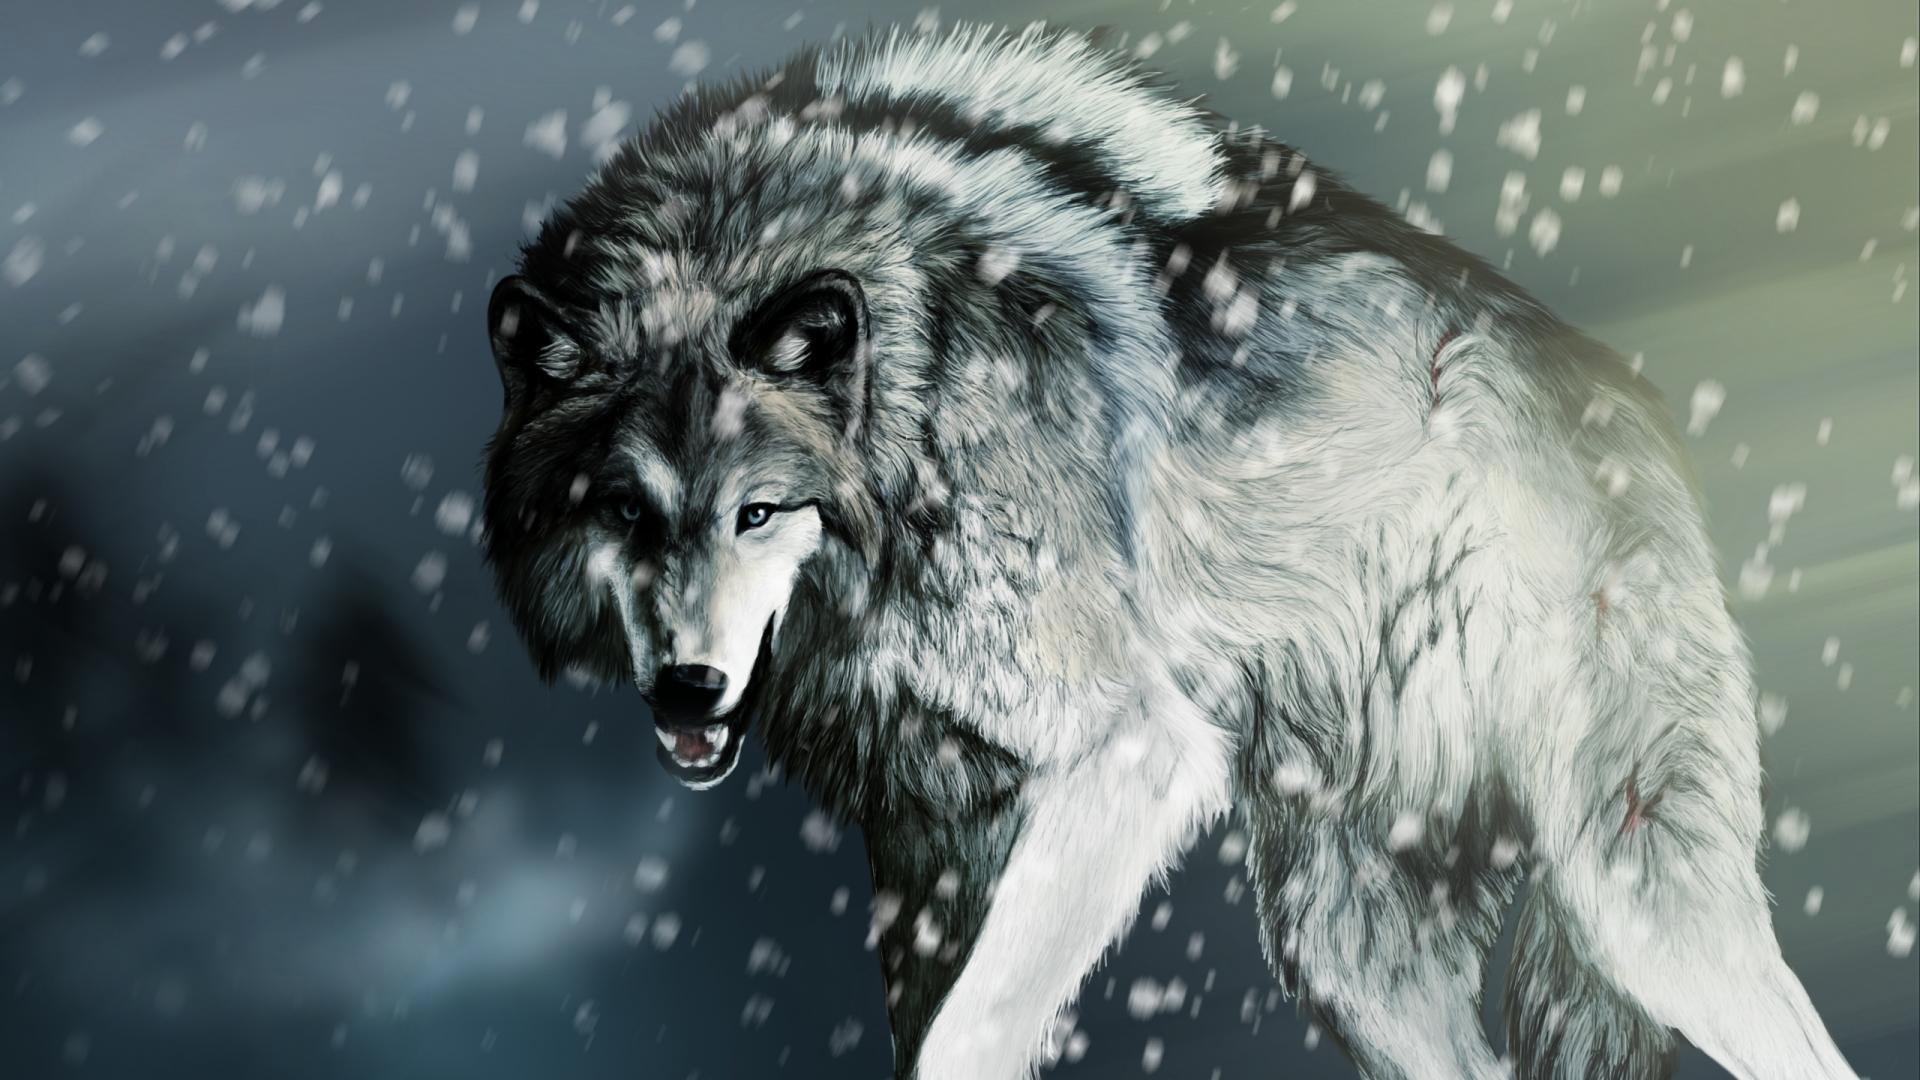 LONE WOLF Live Wallpapers by Jose Antonio Ortiz